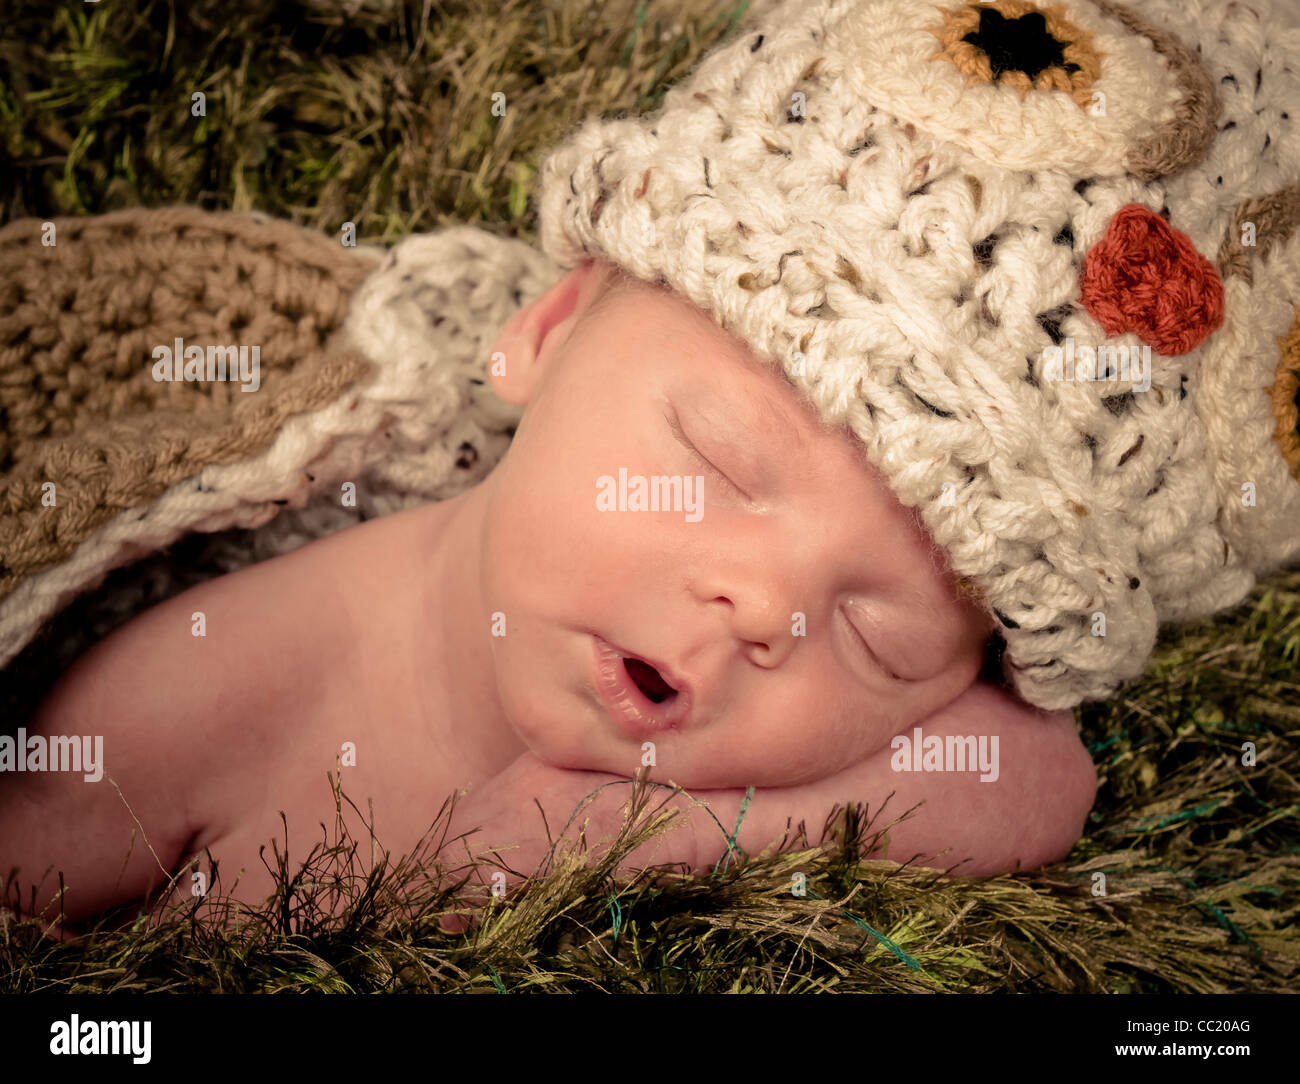 Newborn girl sleeping on a furry green blanket that looks like grass she has on a knit owl hat and cover. Stock Photo